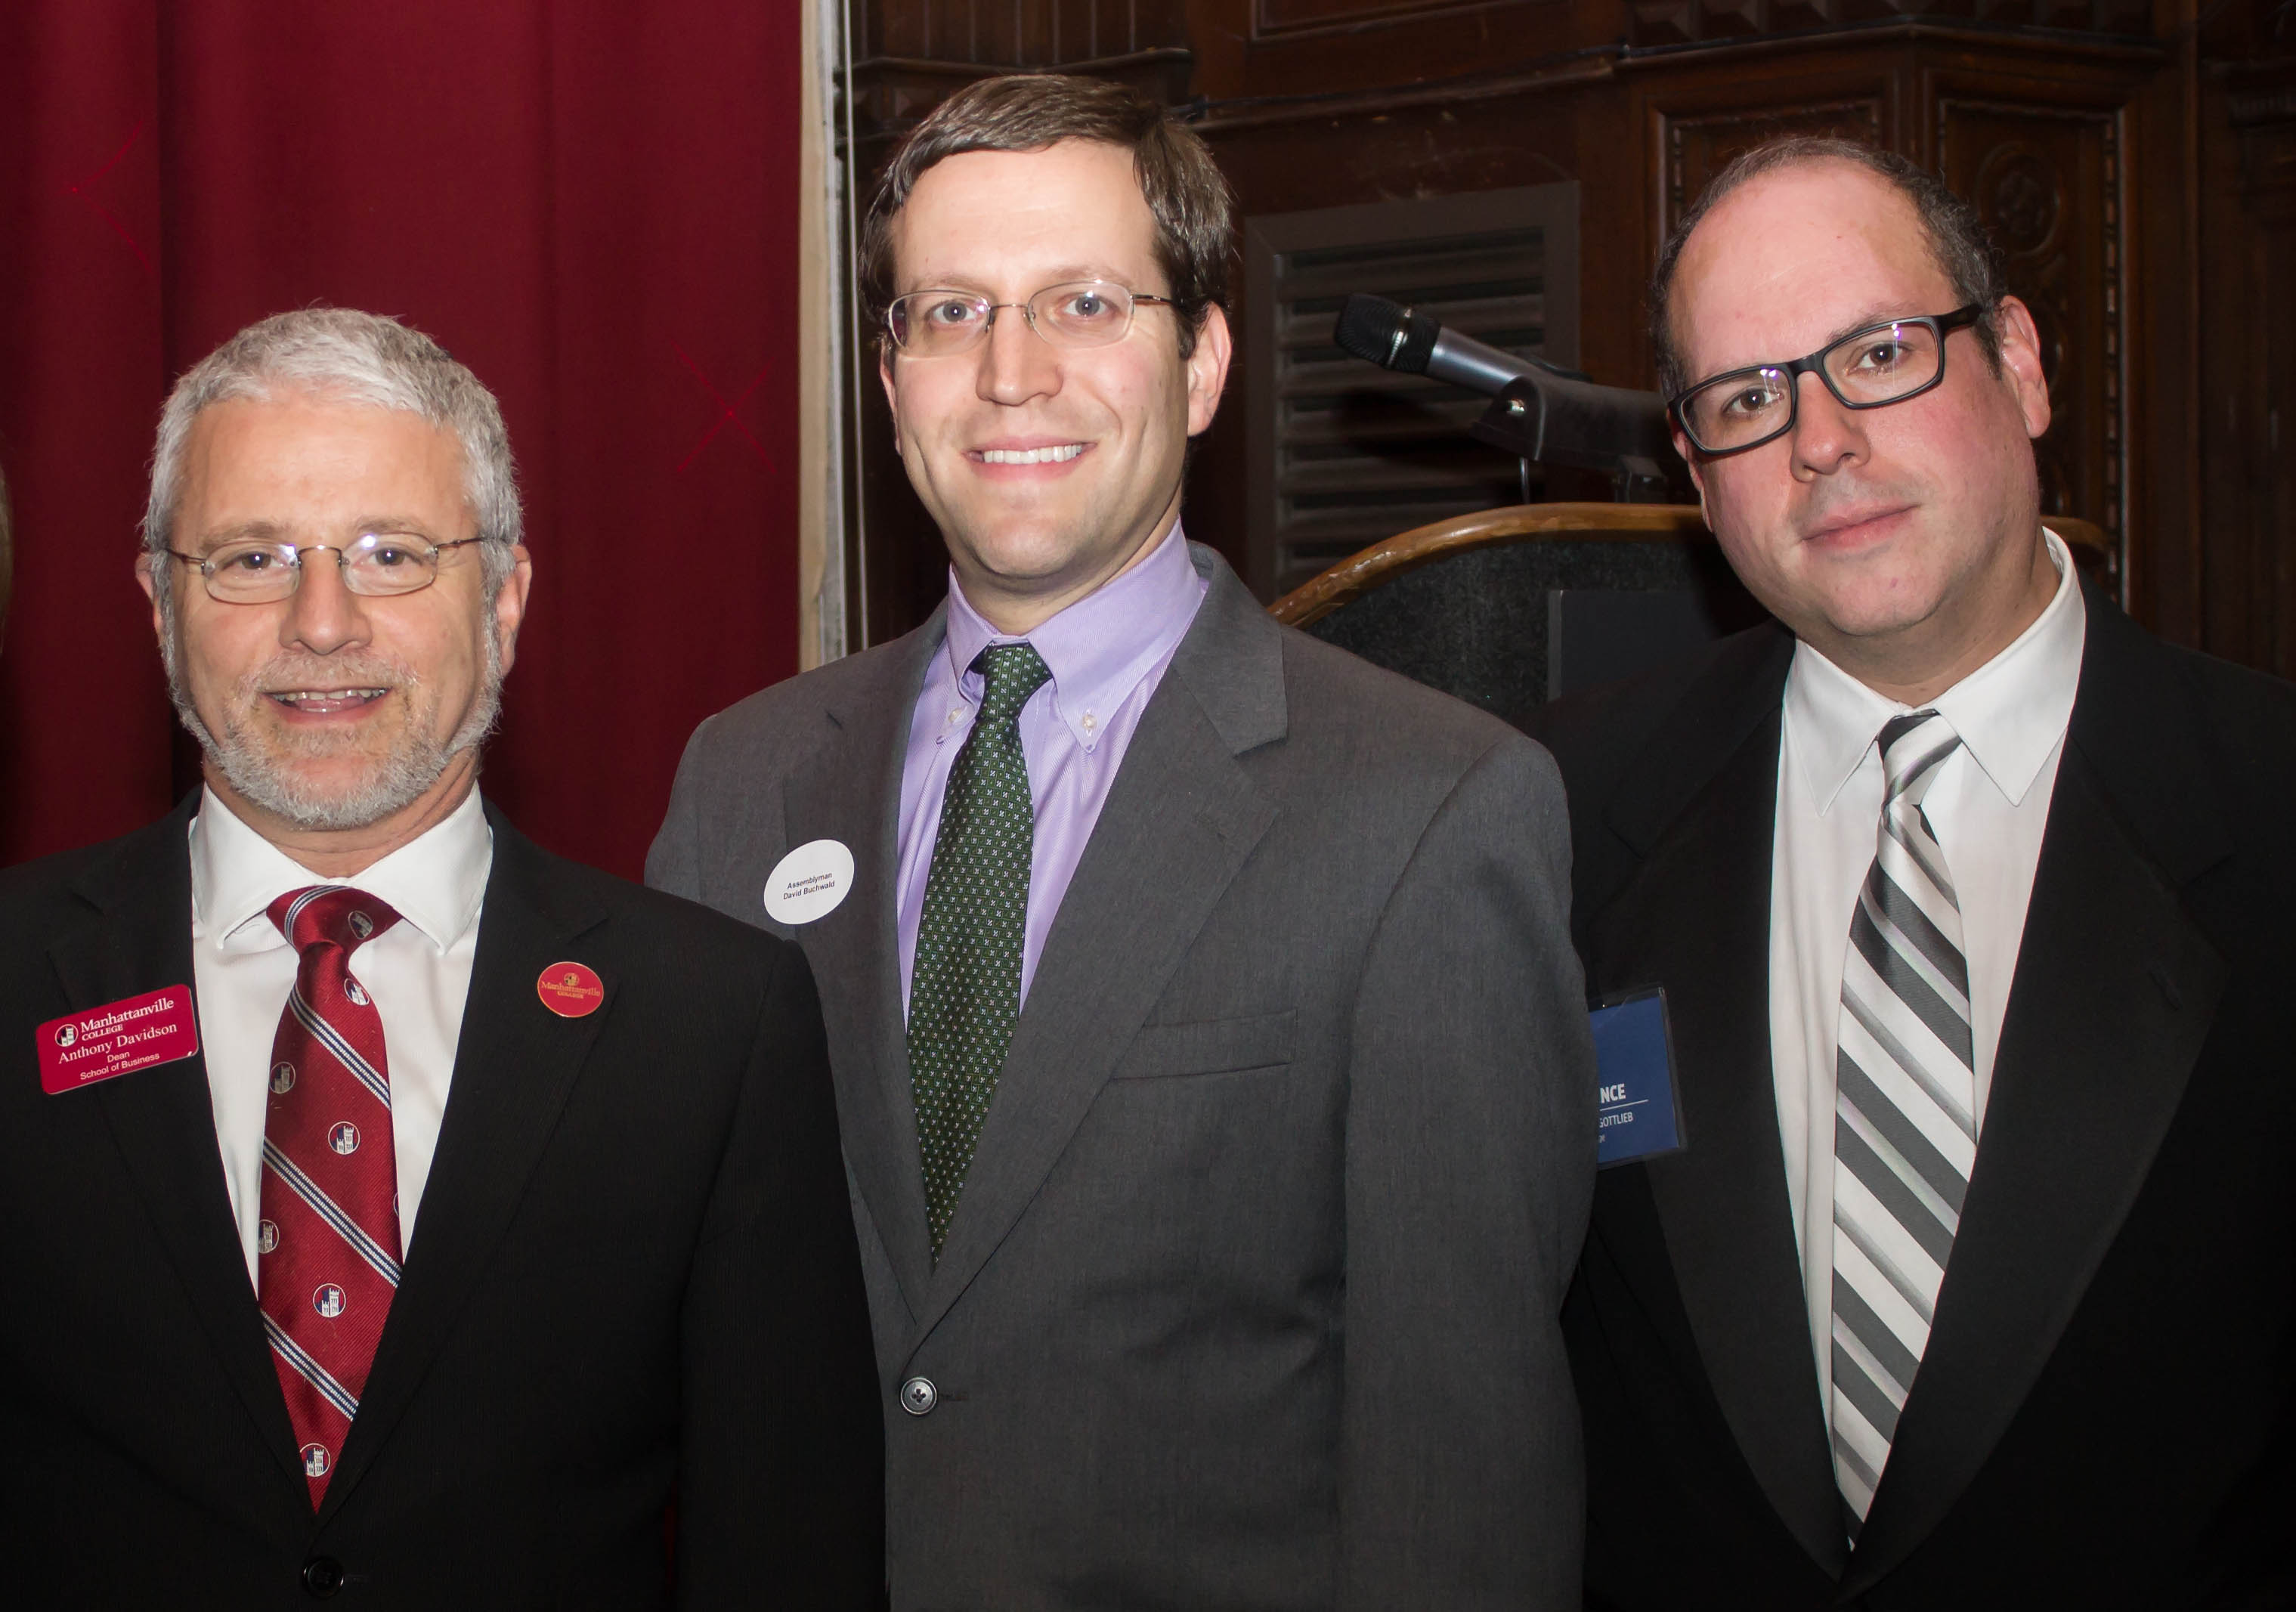 Dr. Anthony Davidson, dean, Manhattanville School of Business; NYS Assemblyman David Buchwald (D-Westchester); and Laurence Gottlieb, president and CEO, Hudson Valley Economic Development Corporation.